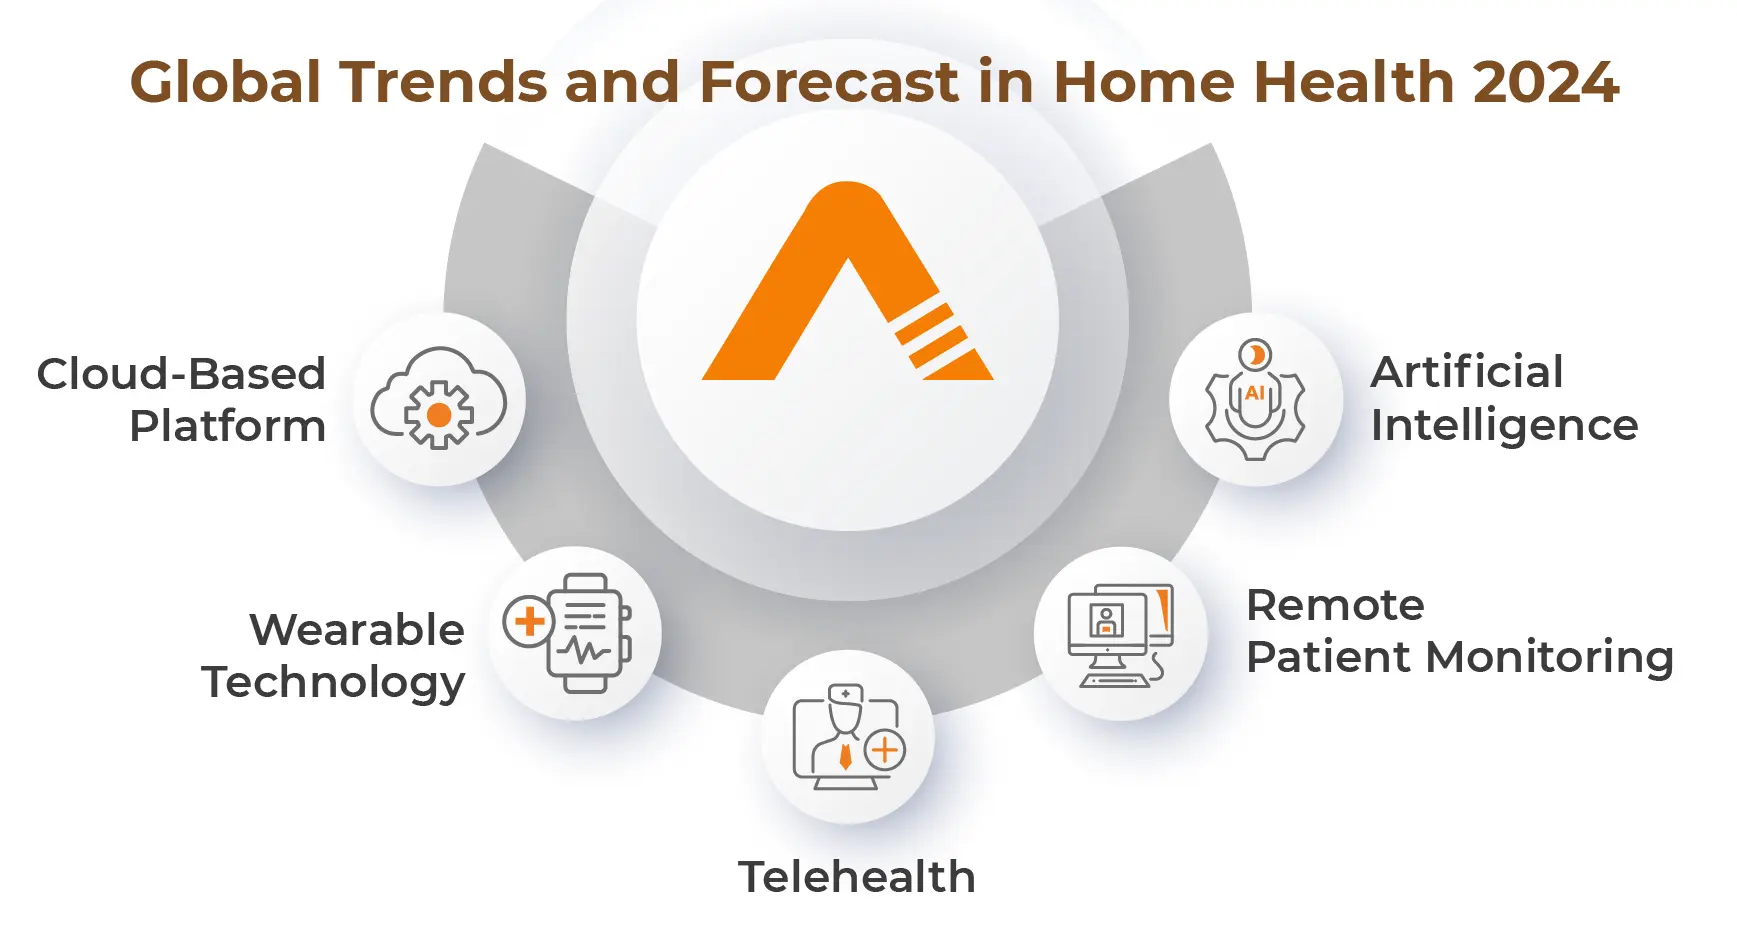 Global Trends and Forecast in Home Health 2024